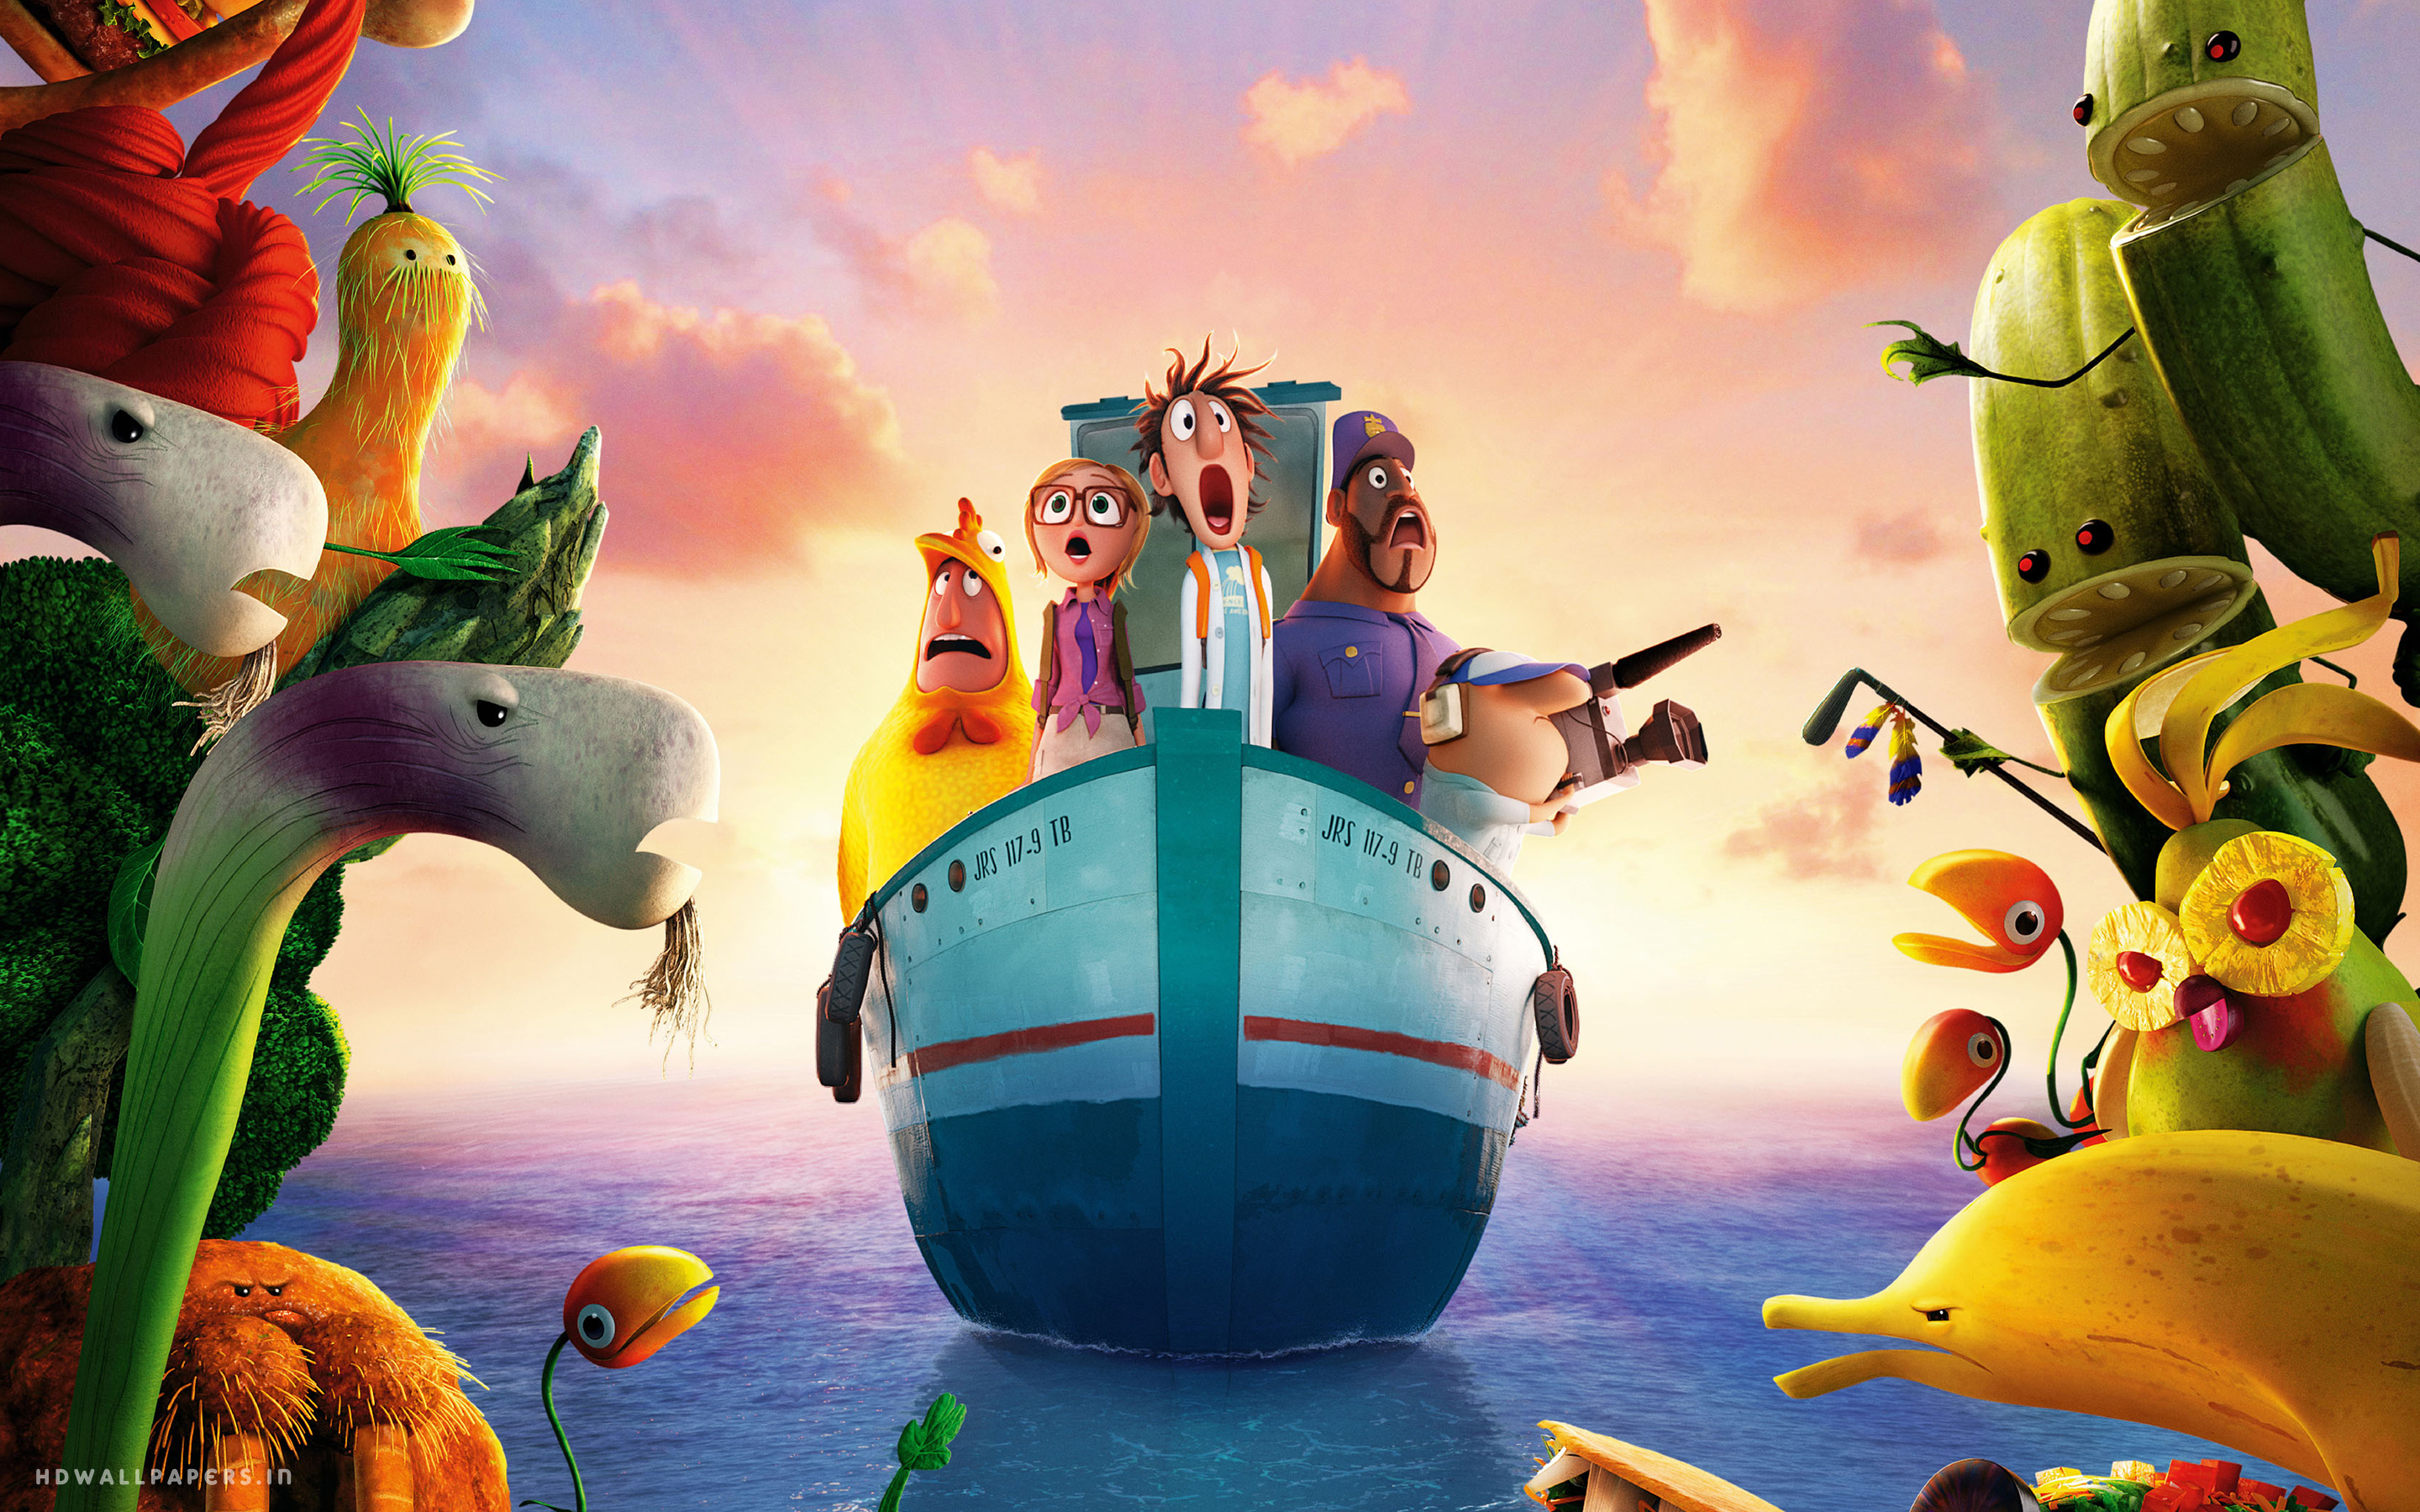 Cloudy With A Chance Of Meatballs 2 Backgrounds, Compatible - PC, Mobile, Gadgets| 2880x1800 px